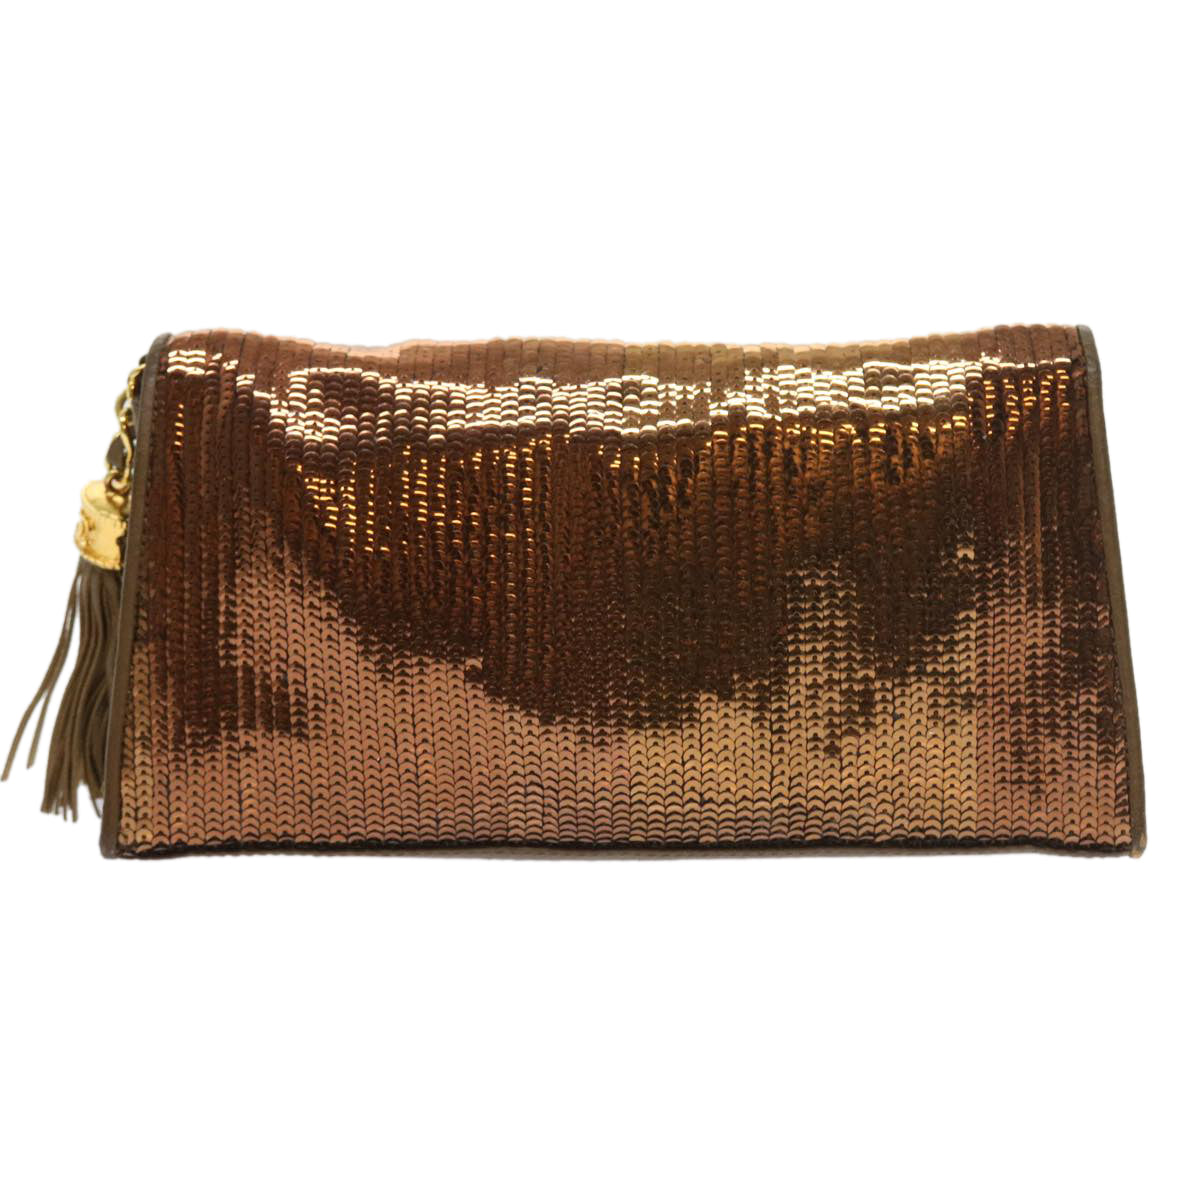 CHANEL Sequin Clutch Bag Leather Bronze CC Auth bs9383 - 0